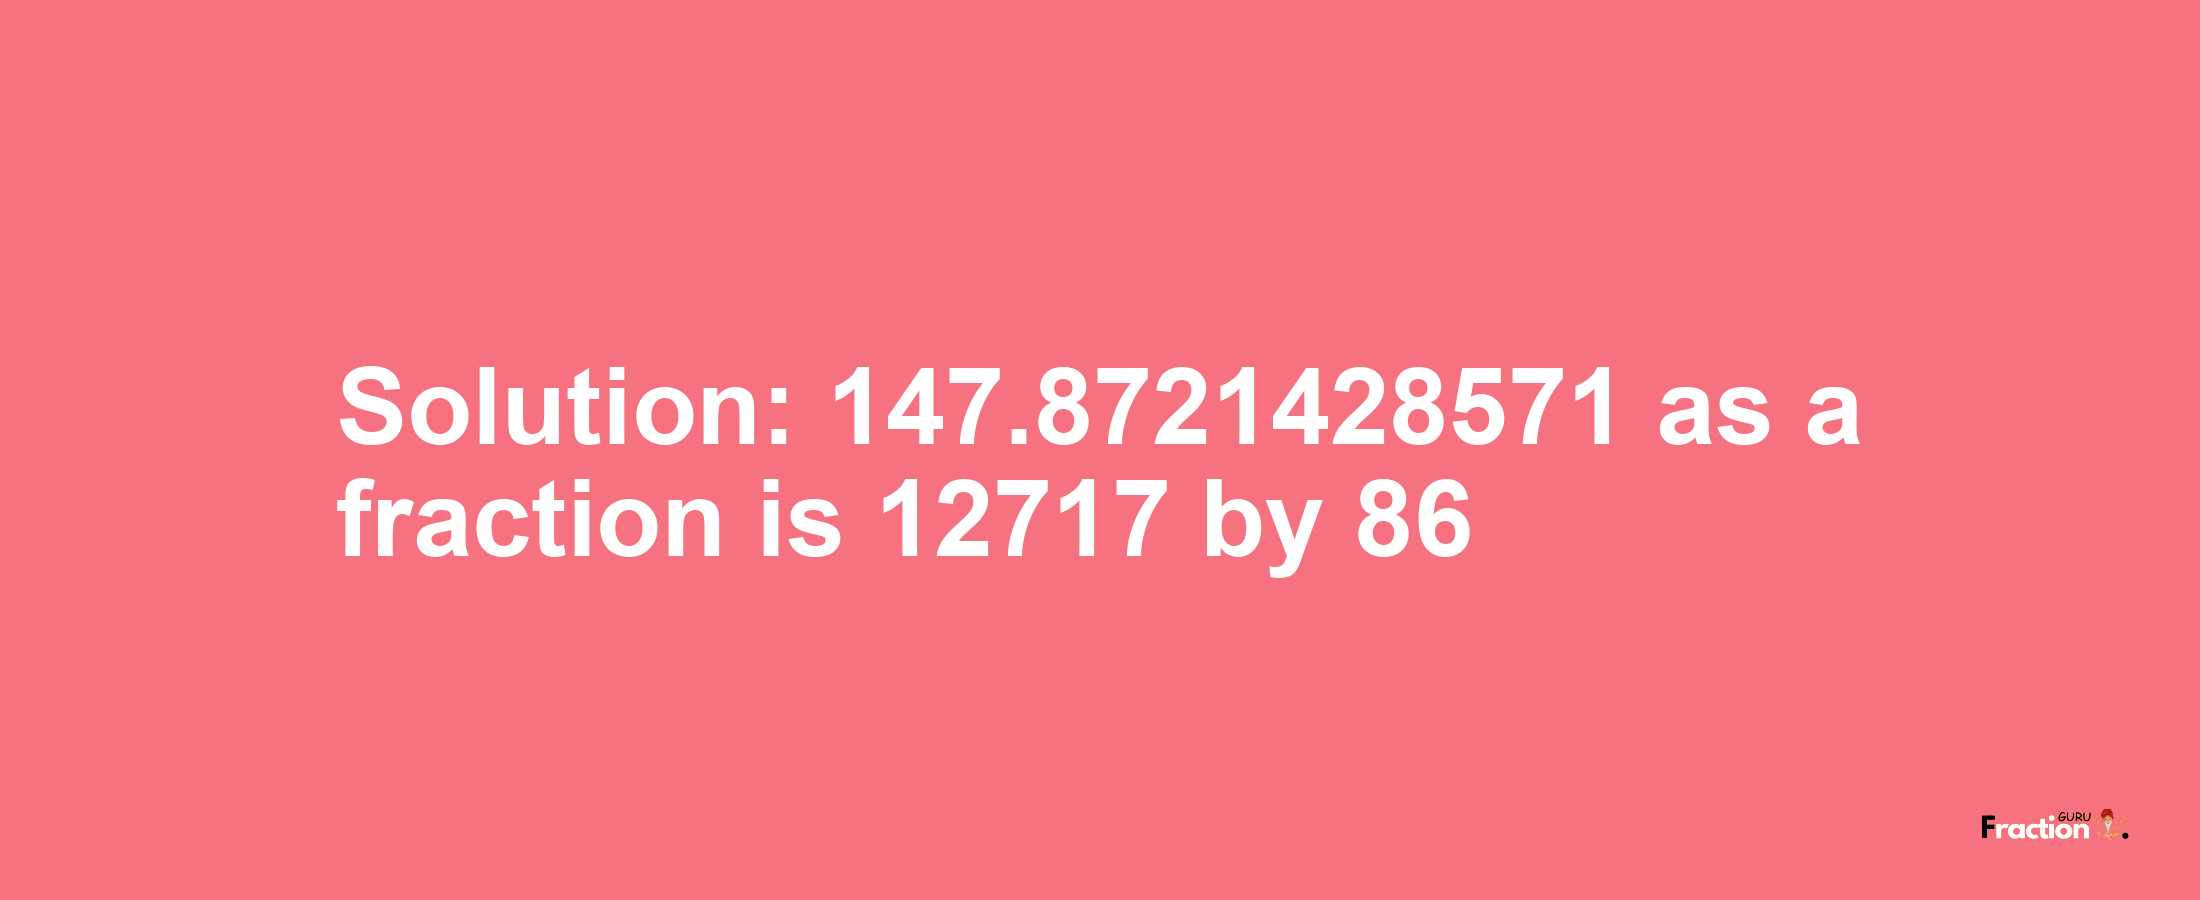 Solution:147.8721428571 as a fraction is 12717/86